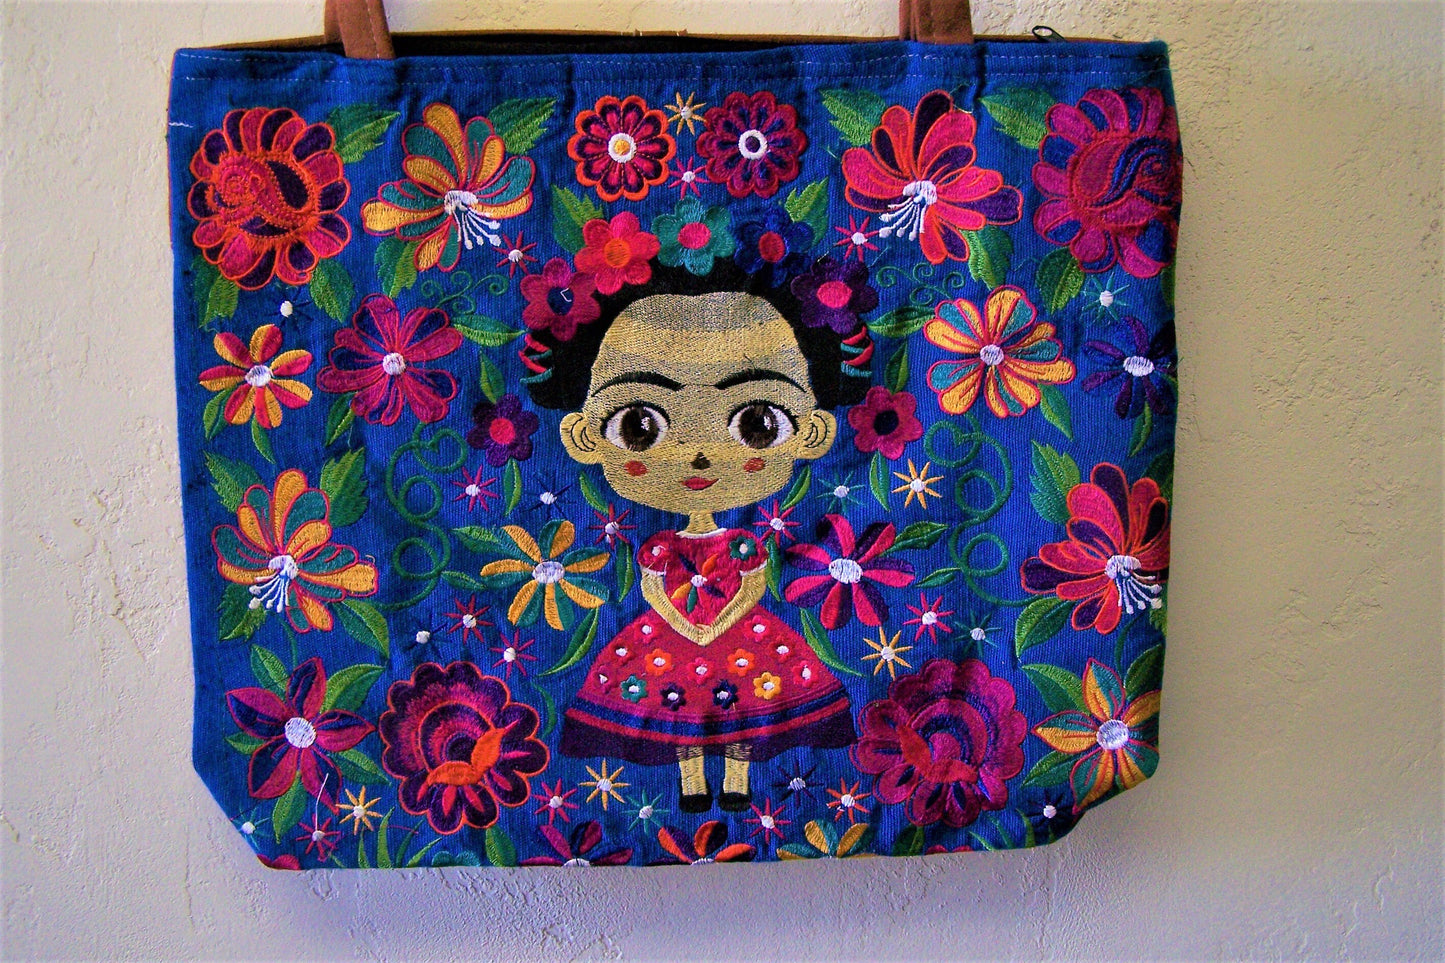 Frida! Large Embroidered Leather Shoulder Bag Purse, Lined Interior, 2 Zipper Pouches, Young Frida Kahlo - Blue #1